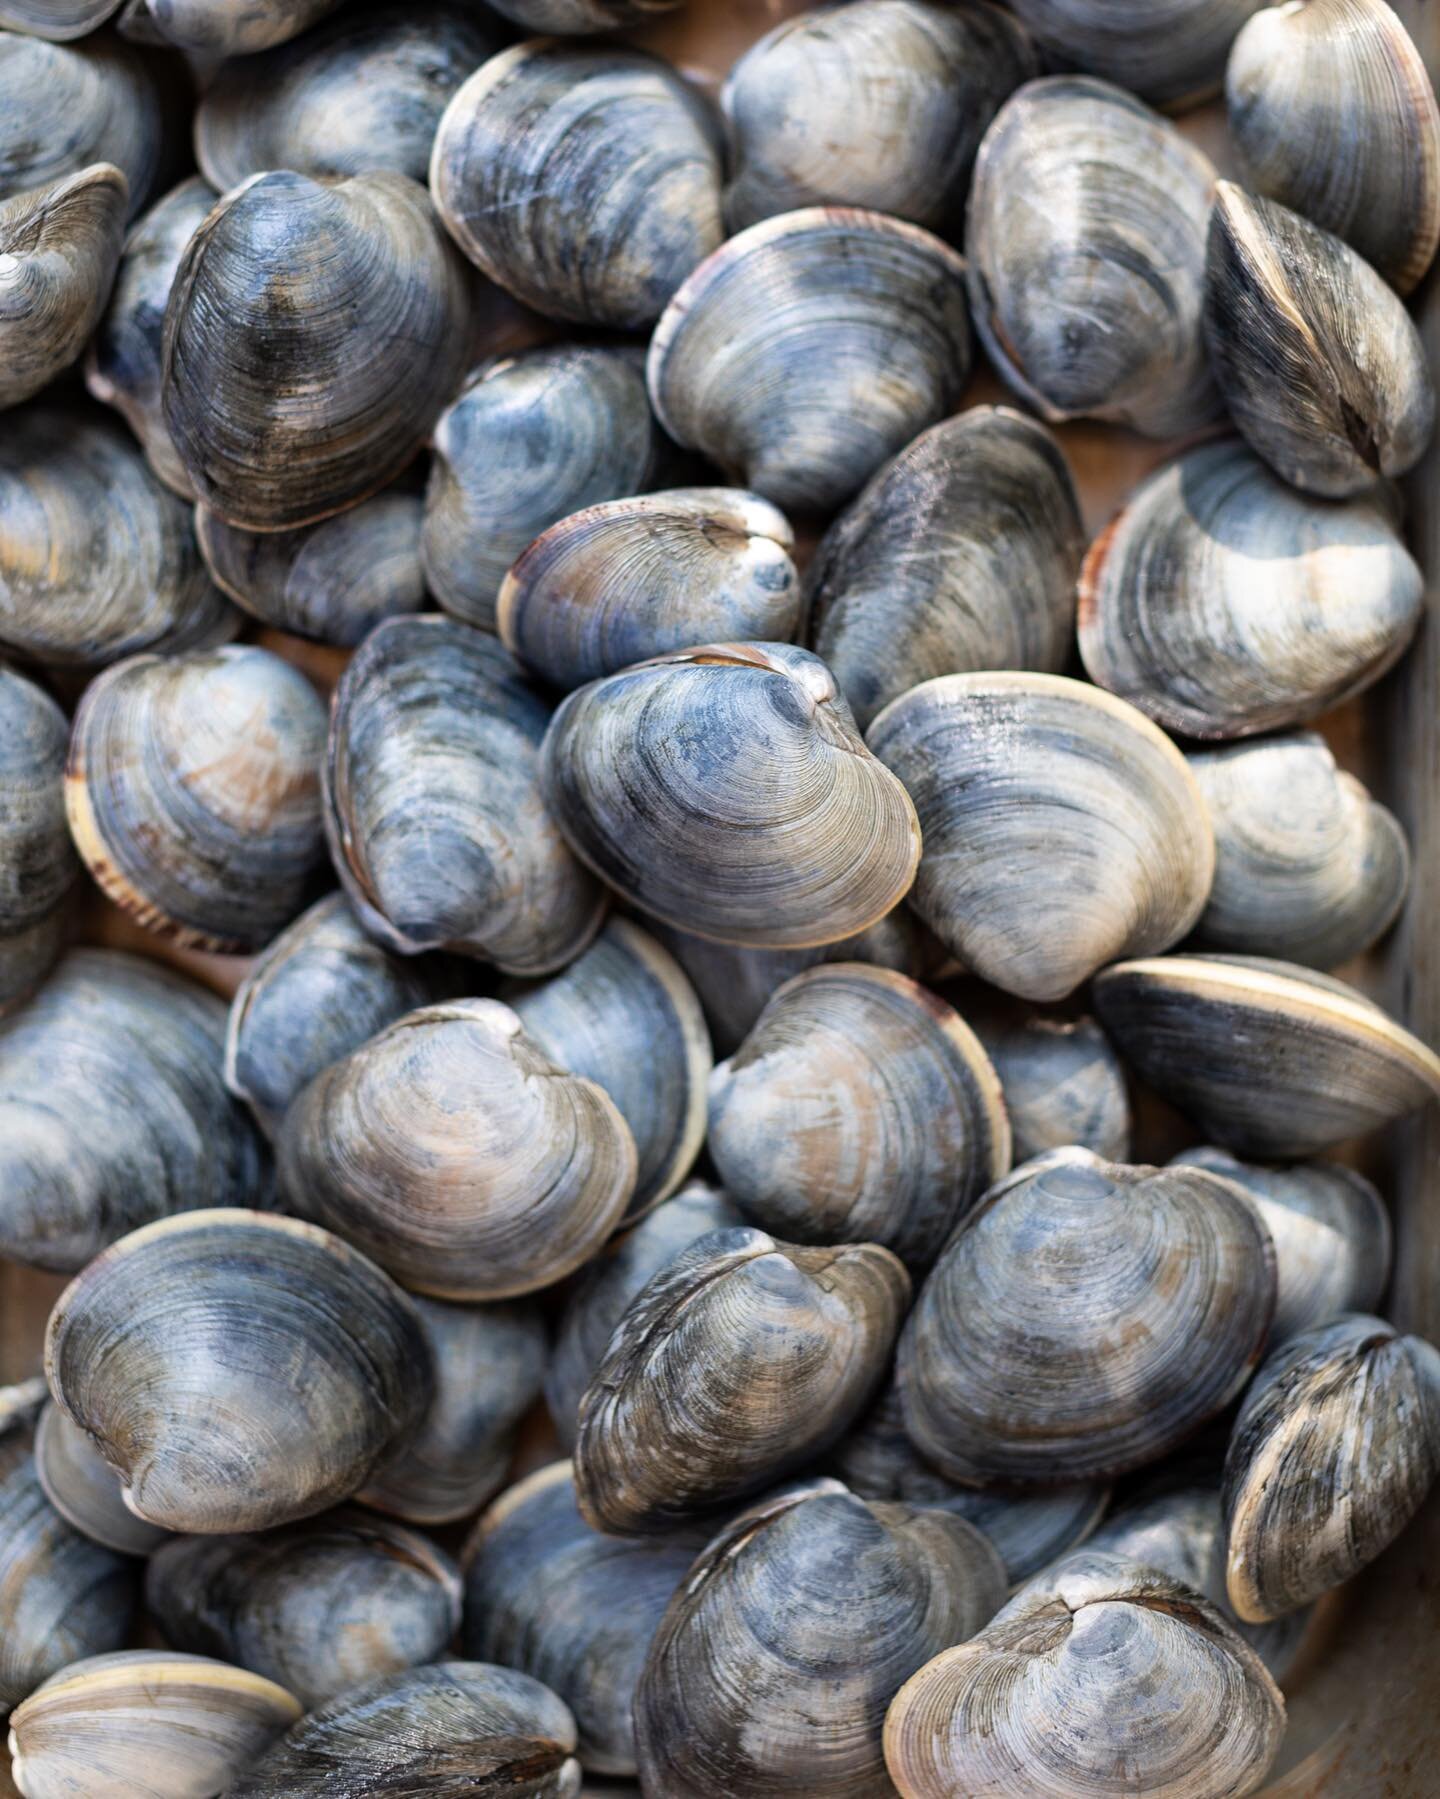 A haiku-recipe:

dig clams on Cape Cod
butter garlic wine lemon
grilled homemade bread EAT

#summereats #capecodeats